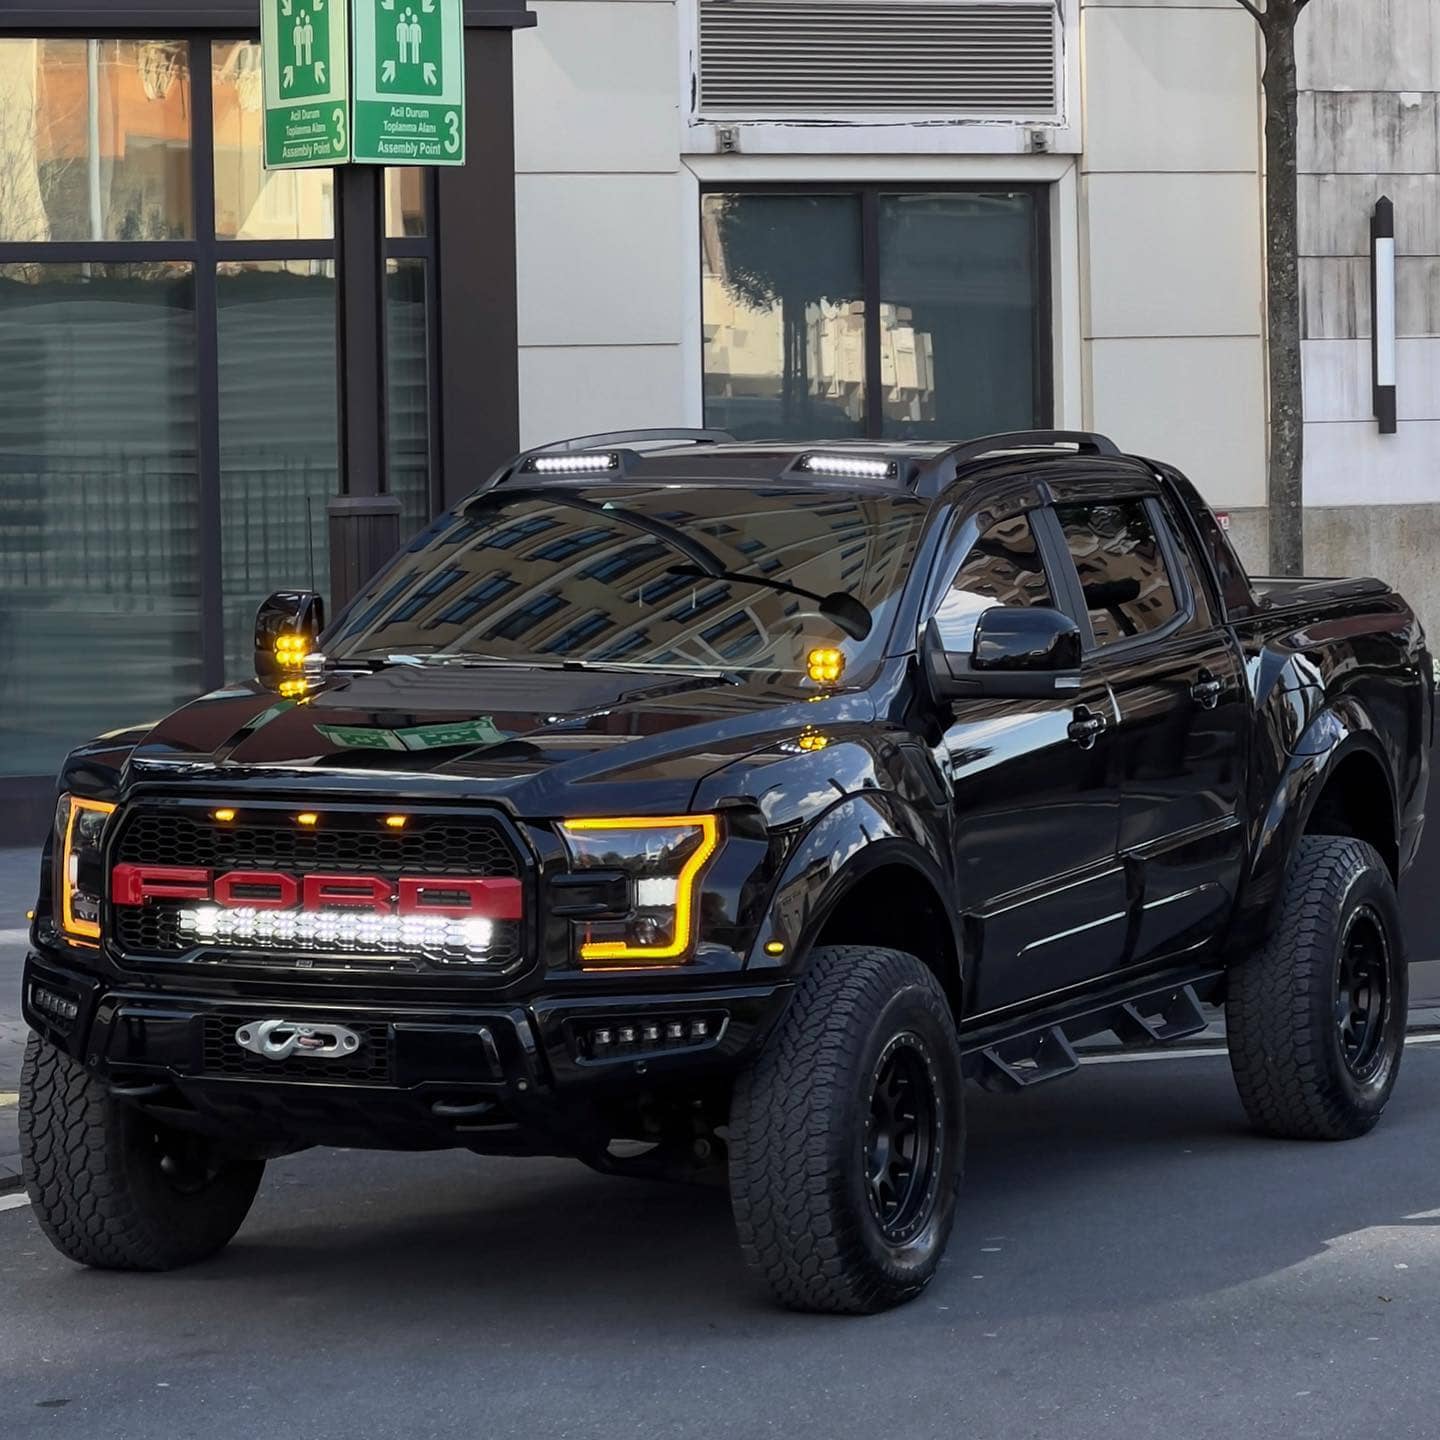 Black Ford Ranger With 13th Gen 2015+ Ford F150 Front End